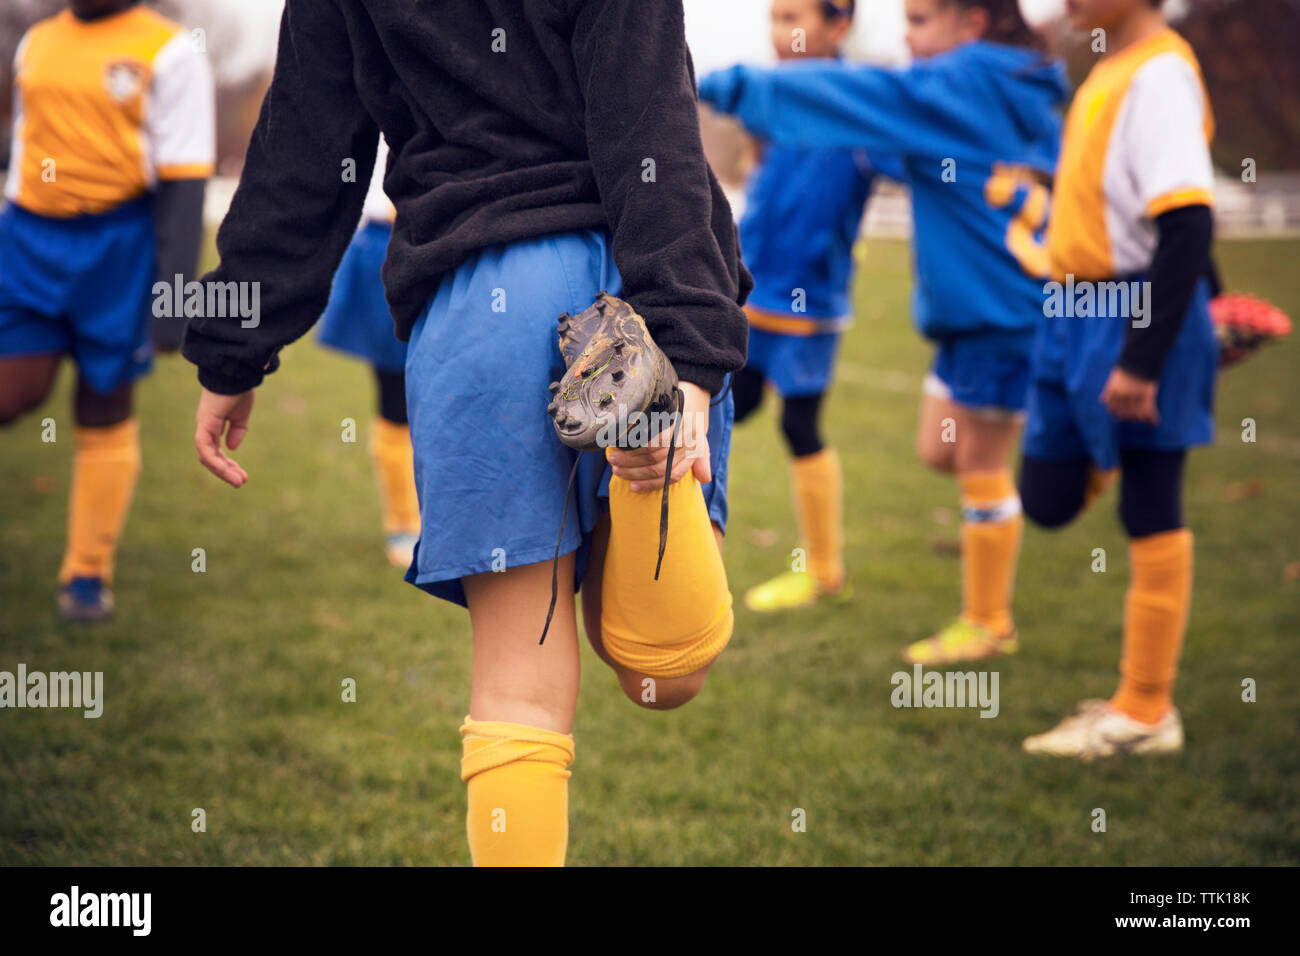 Soccer players stretching legs while warming up on playing field Stock Photo